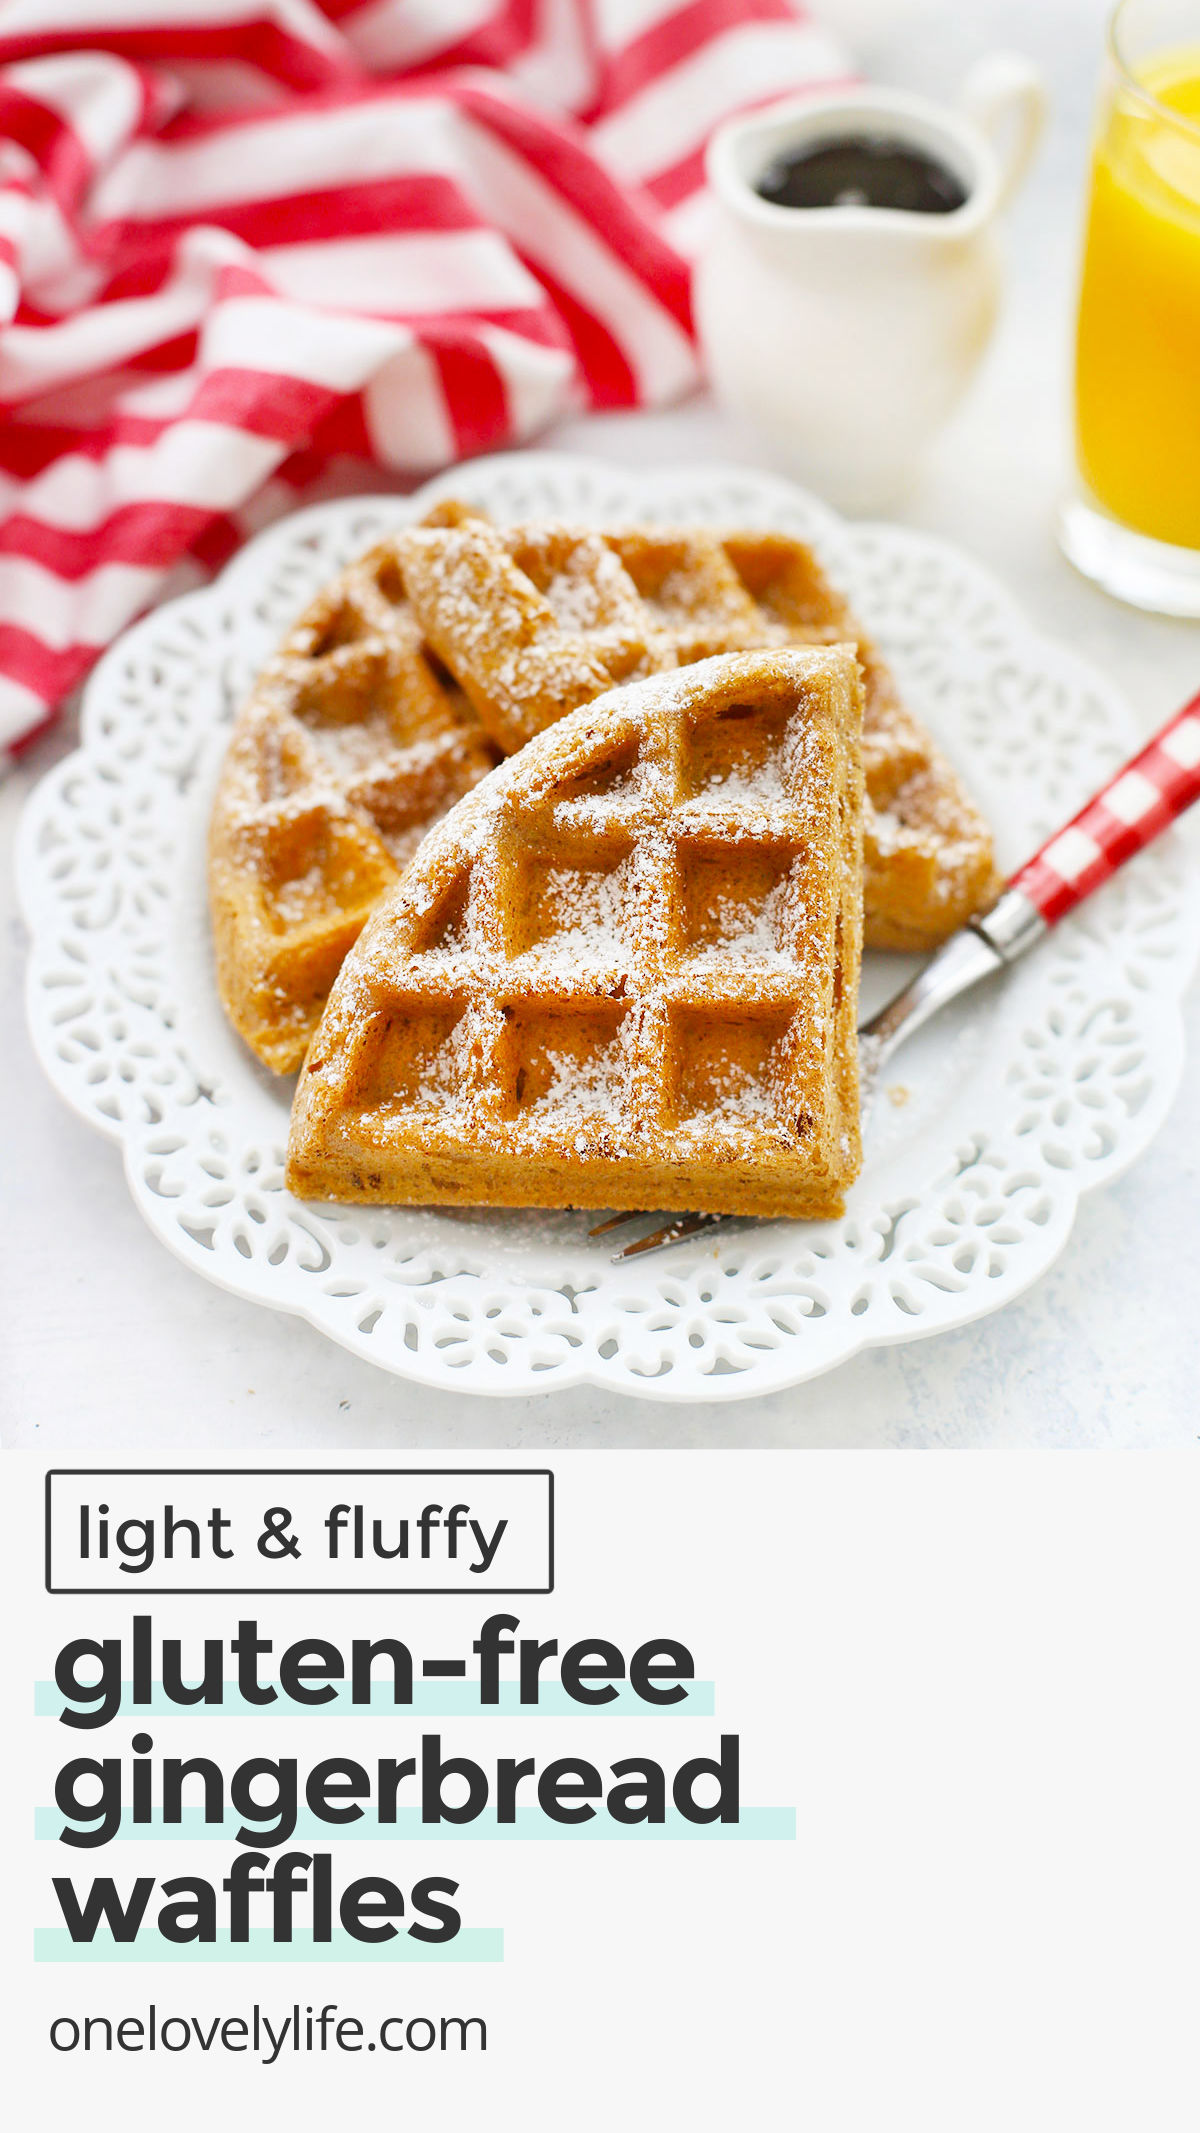 Gluten Free Gingerbread Waffles - crispy exterior, fluffy interior, and perfectly spiced. The perfect holiday breakfast! (Gluten free, dairy free)// gluten free Holiday breakfast // gluten free Christmas breakfast // gluten free waffles recipe // gluten free brunch / gluten free christmas brunch / gluten free holiday brunch